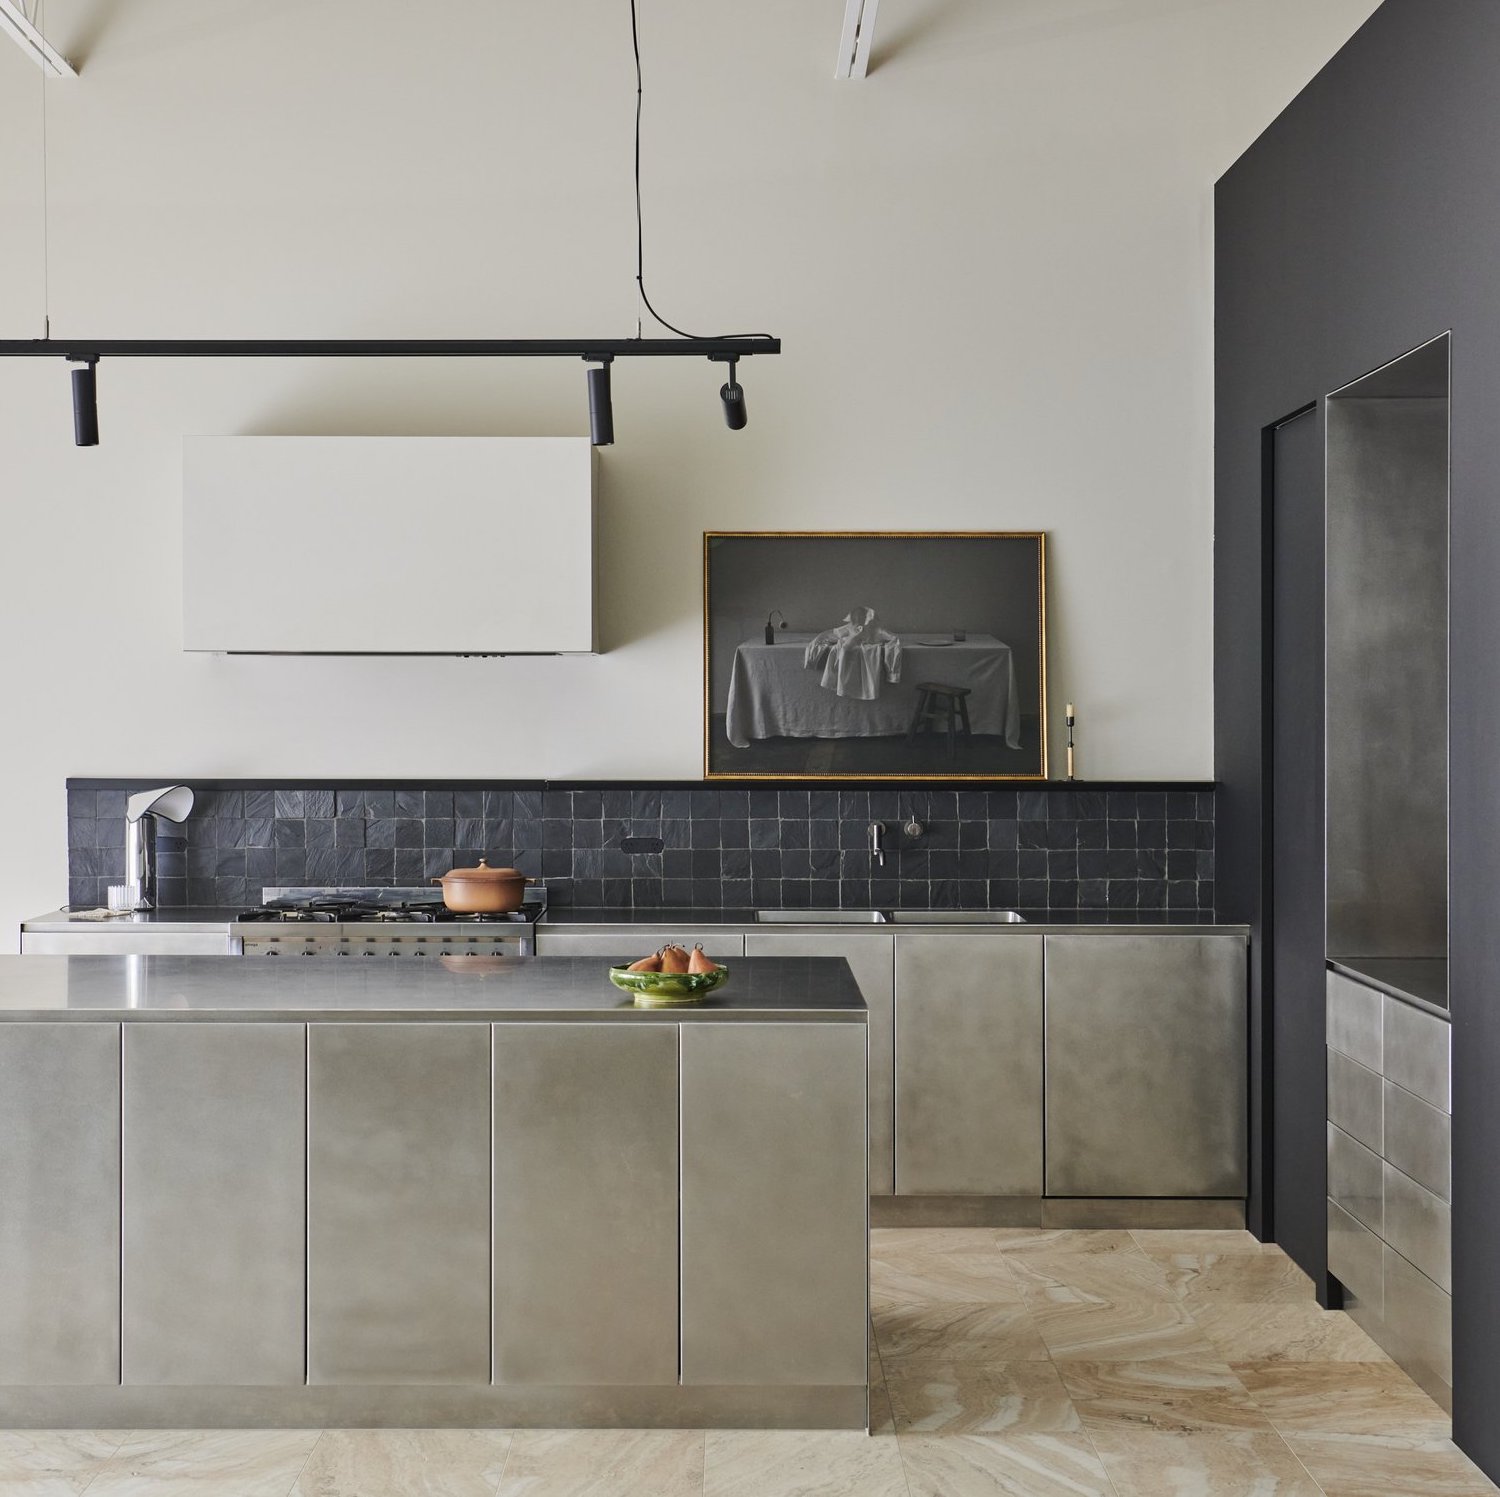 Kitchen Design Trends That are Here to Stay - haven-studios.com